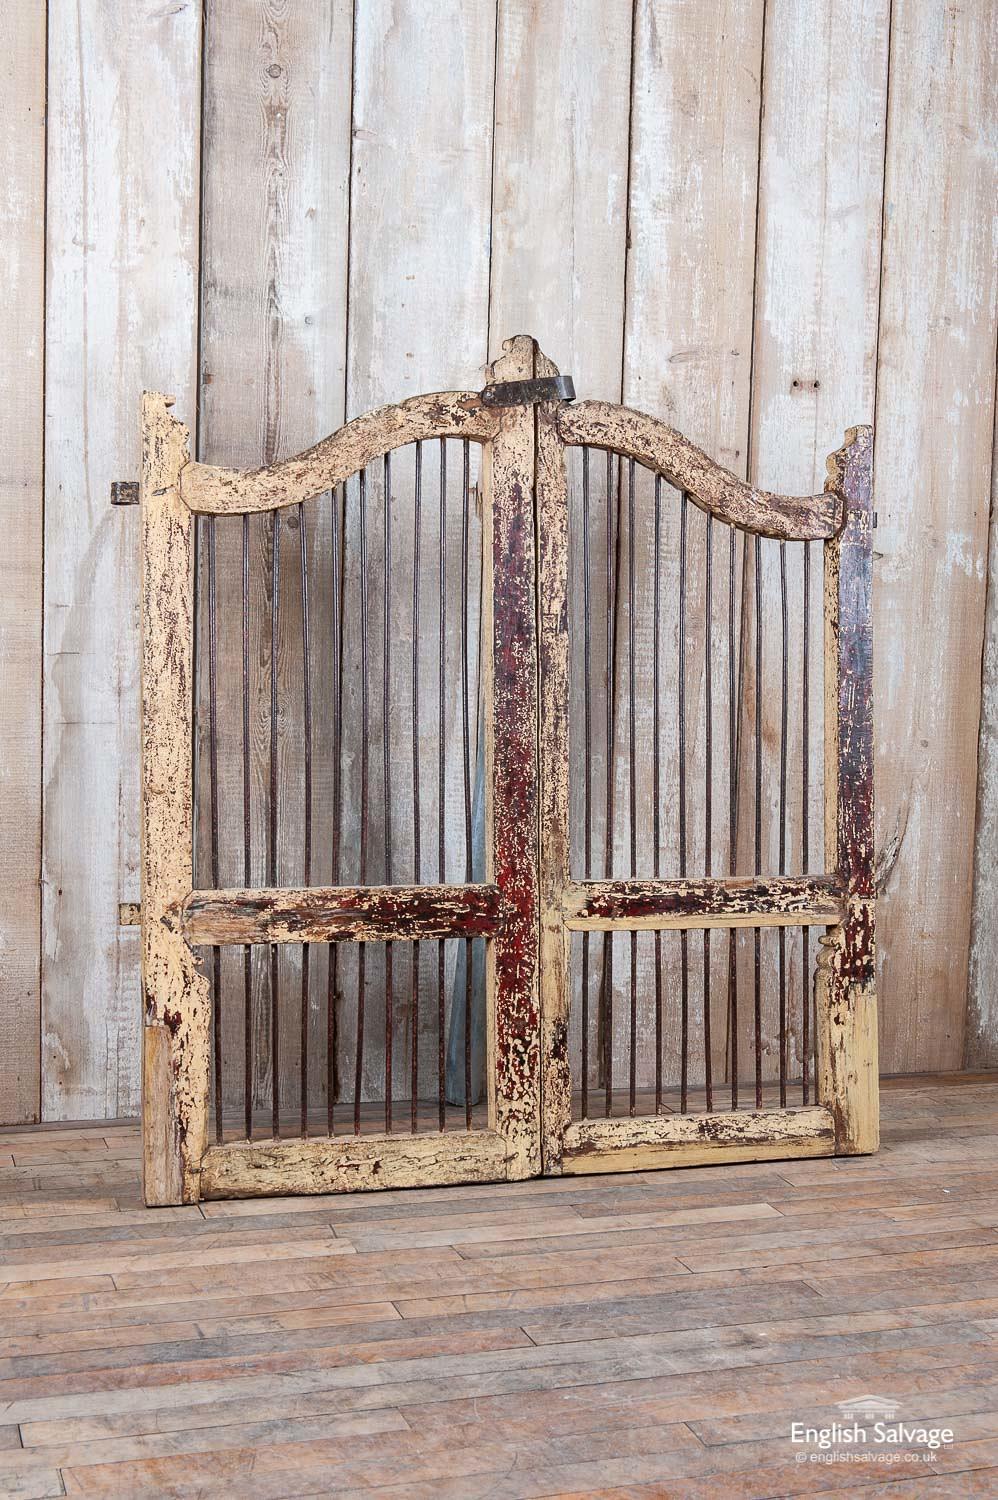 Teak jali dog gates/ saloon door from India. Iron bars, hinges and top clasp with solid teak frame.